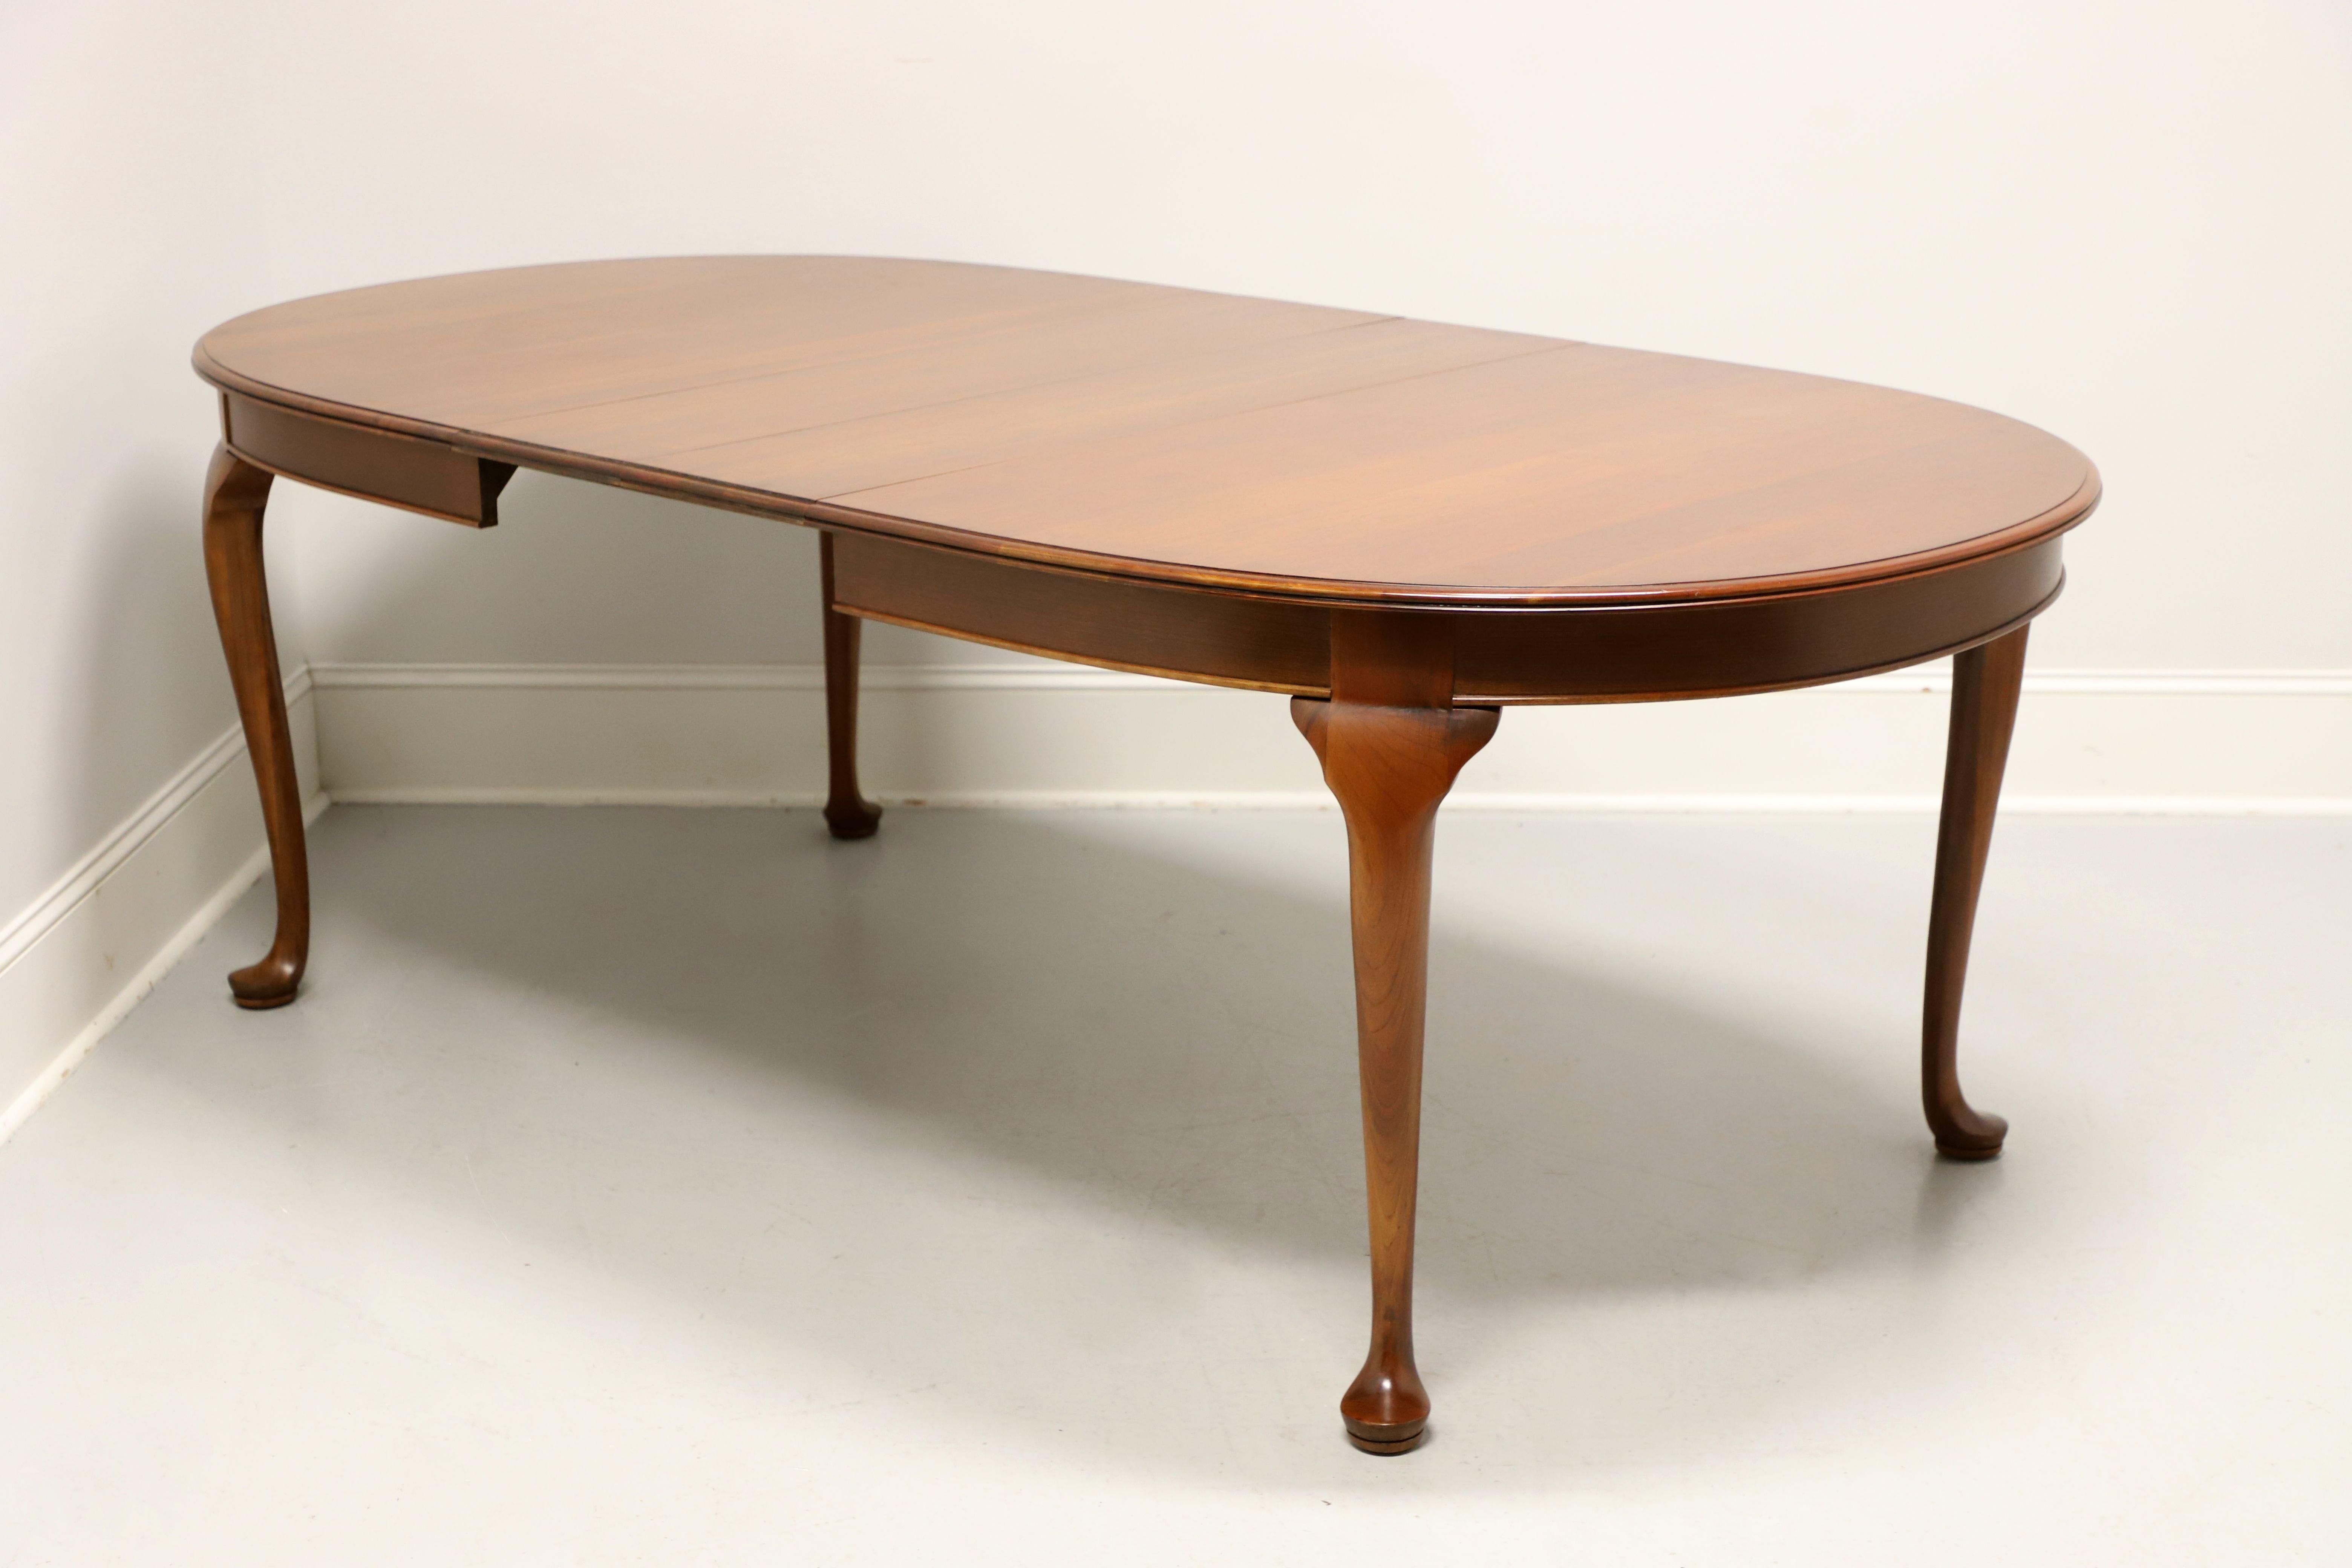 PENNSYLVANIA HOUSE Solid Cherry Queen Anne Dining Table 1